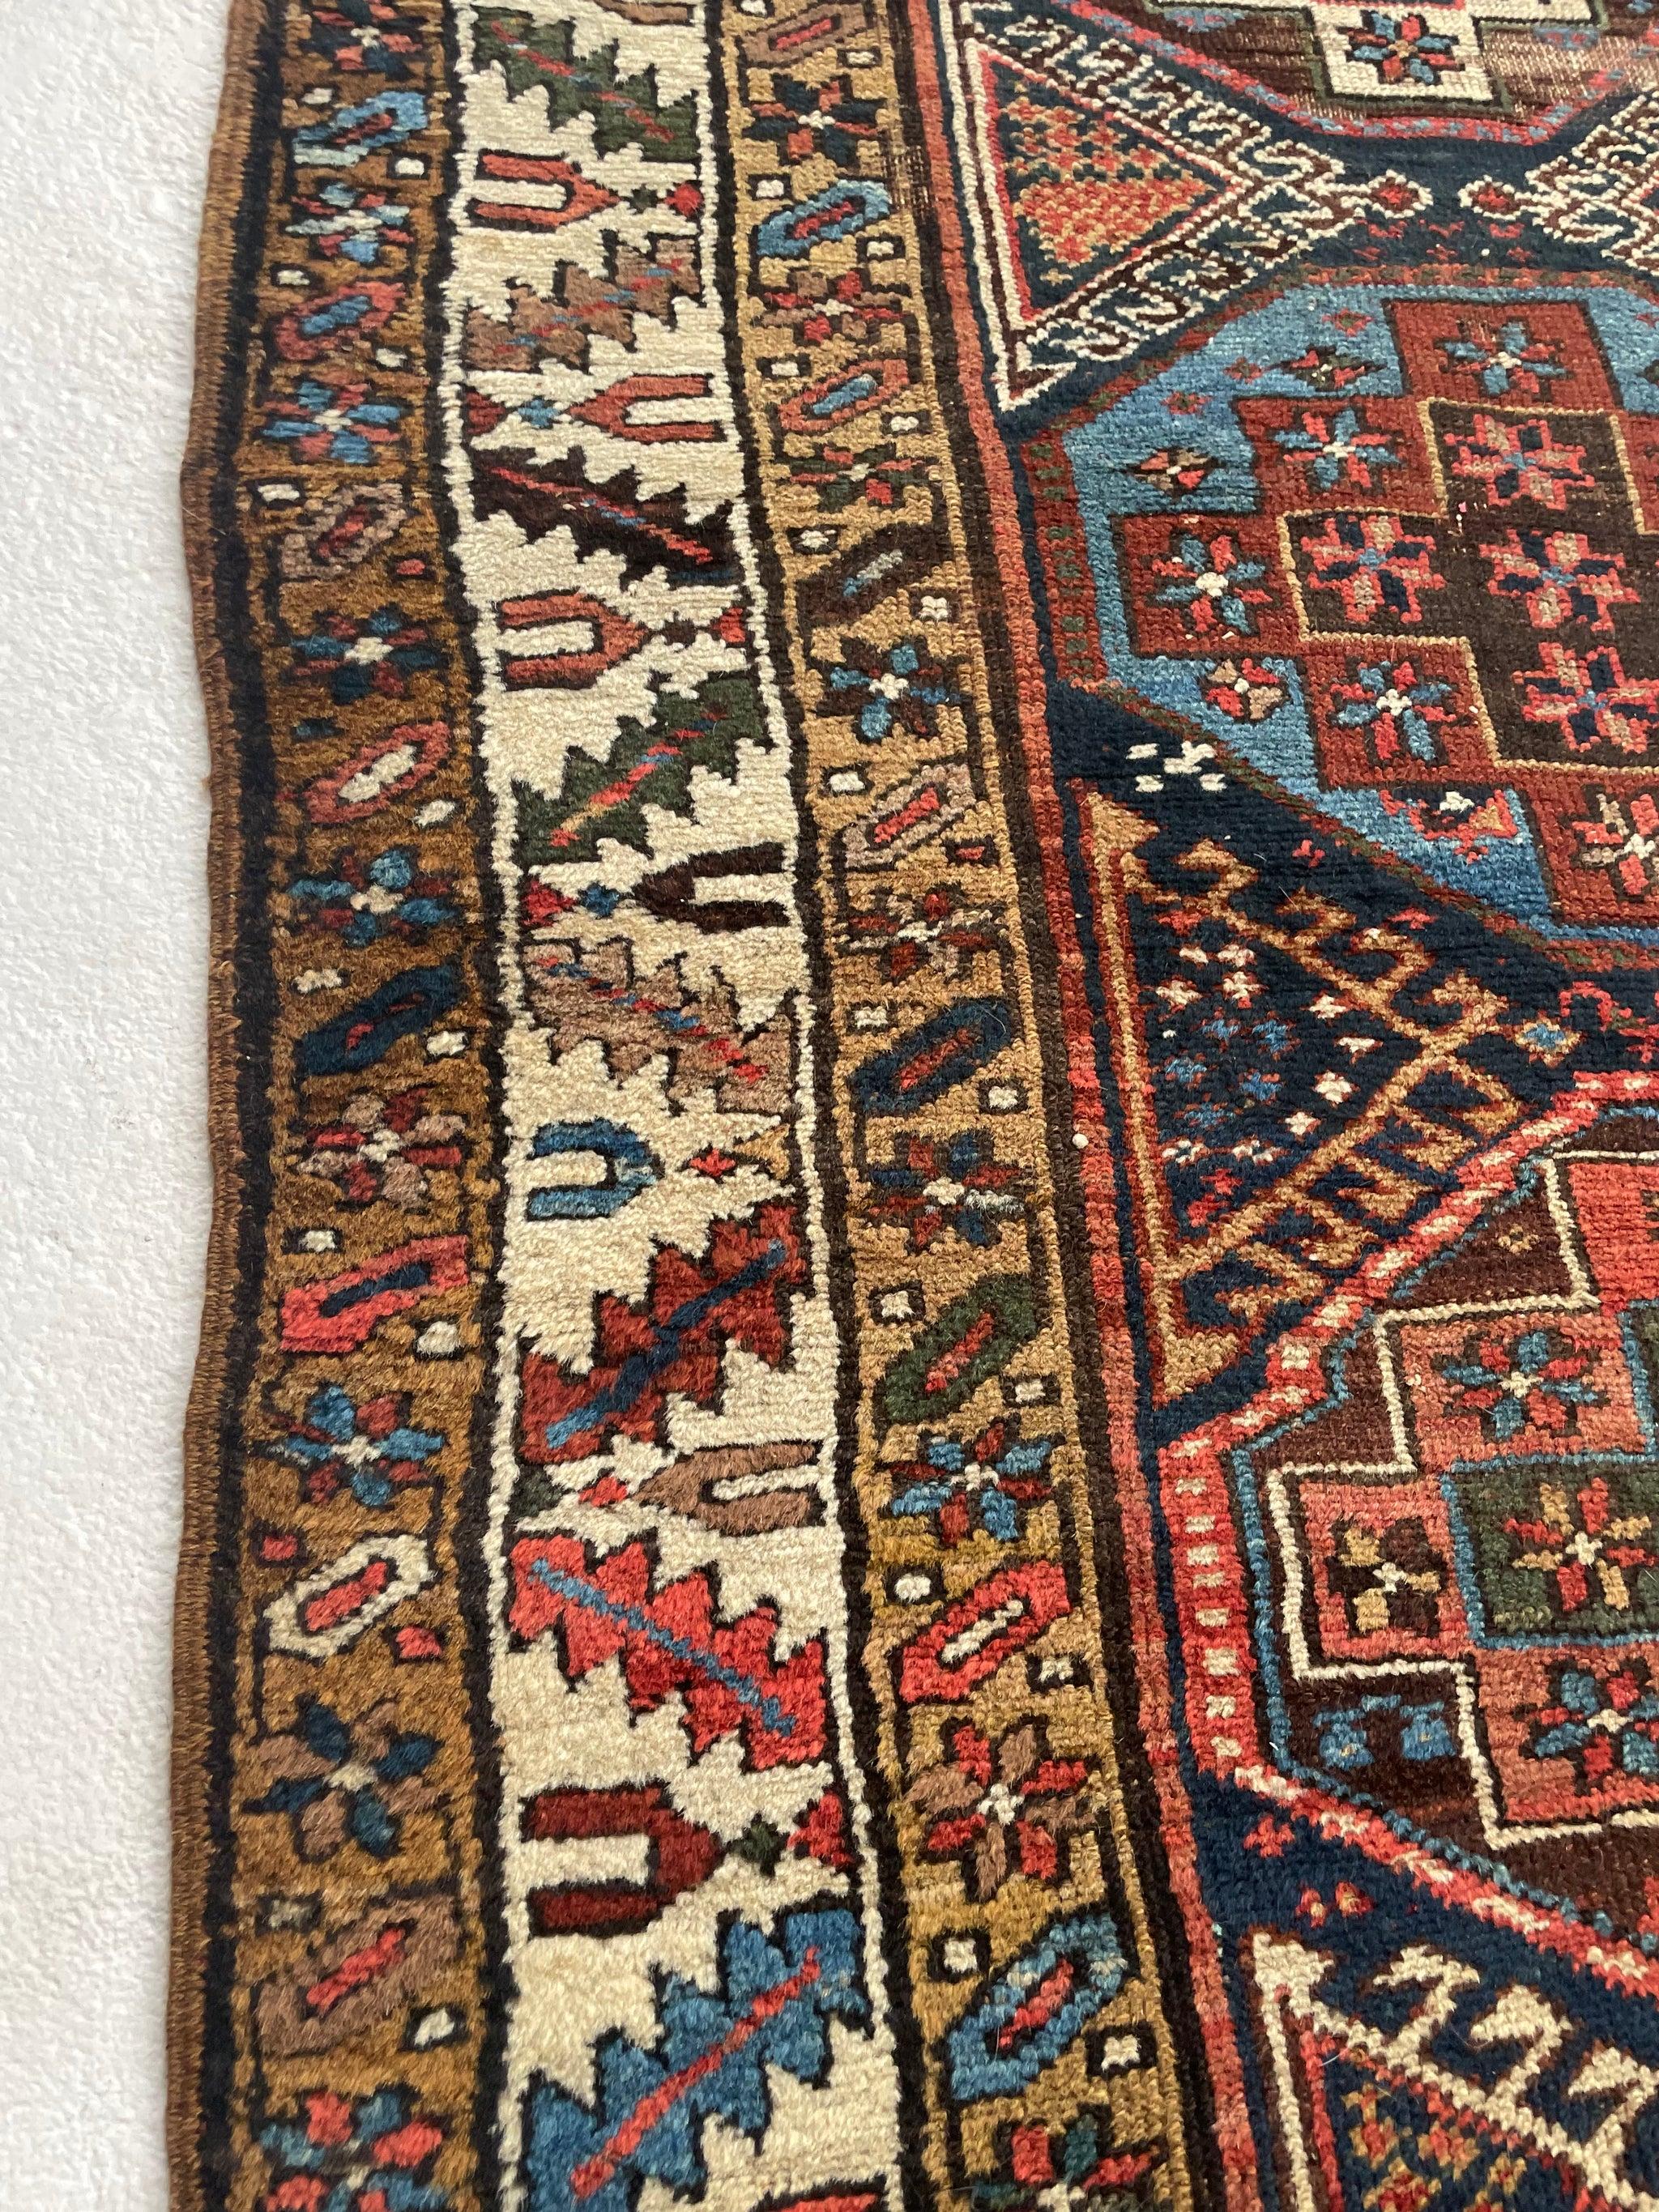 Color Masterclass Antique Tribal Runner  Greens, Blues, Camel, Pinks, Eggplant

About: LOOK AT THOSE COLORS!

Size: 3.6 x 11.4
Age:  Antique, C. 1920-30's
Pile: Medium plush, soft and amazing wool! 

This rug is one-of-a-kind, only one in the world,